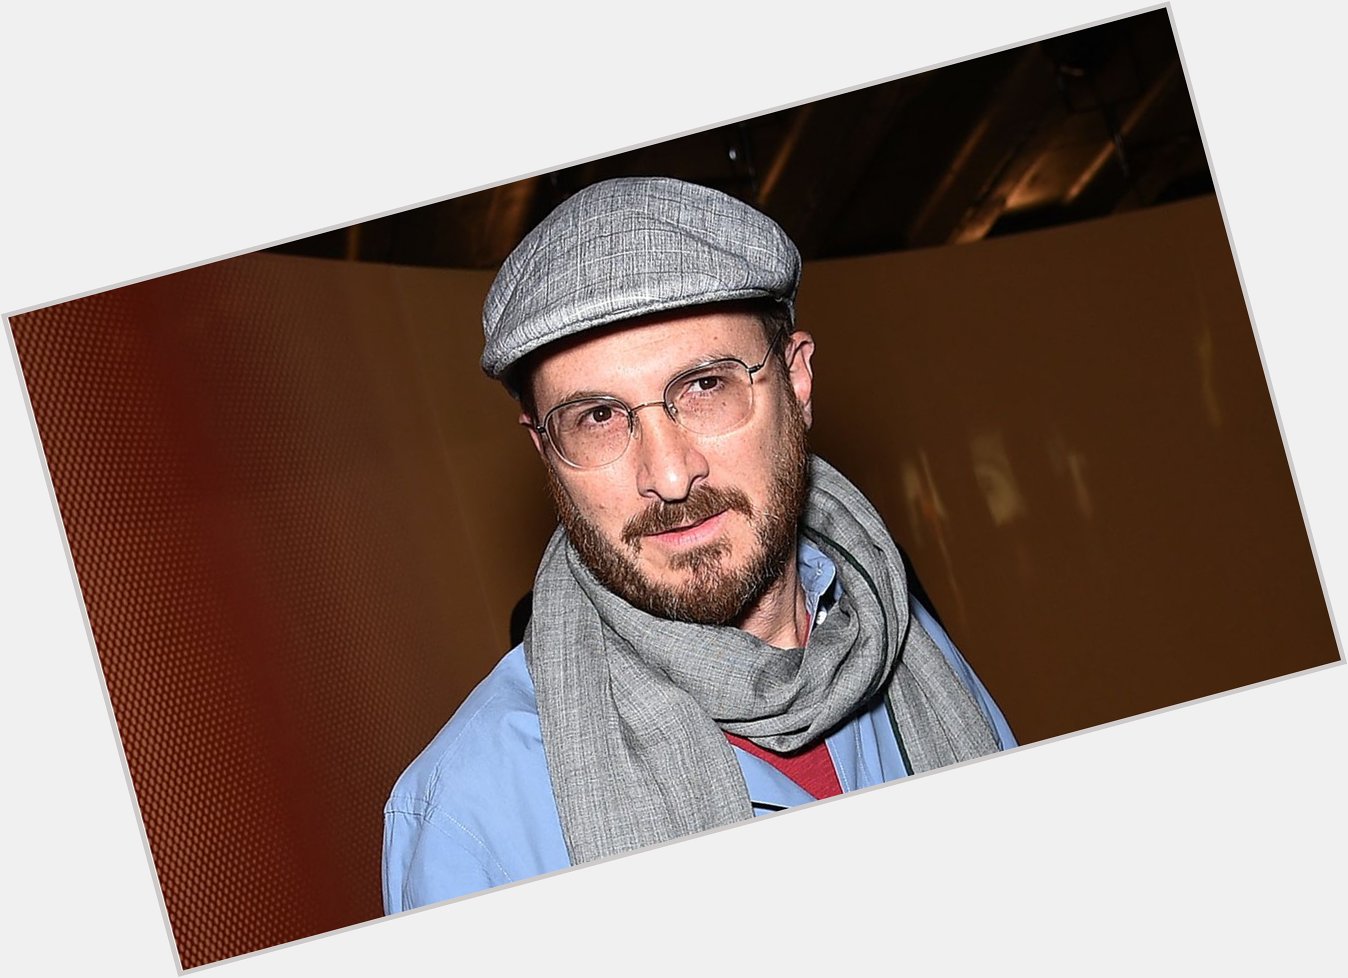 Happy 52nd birthday to director Darren Aronofsky. What is your favorite Aronofsky film? 